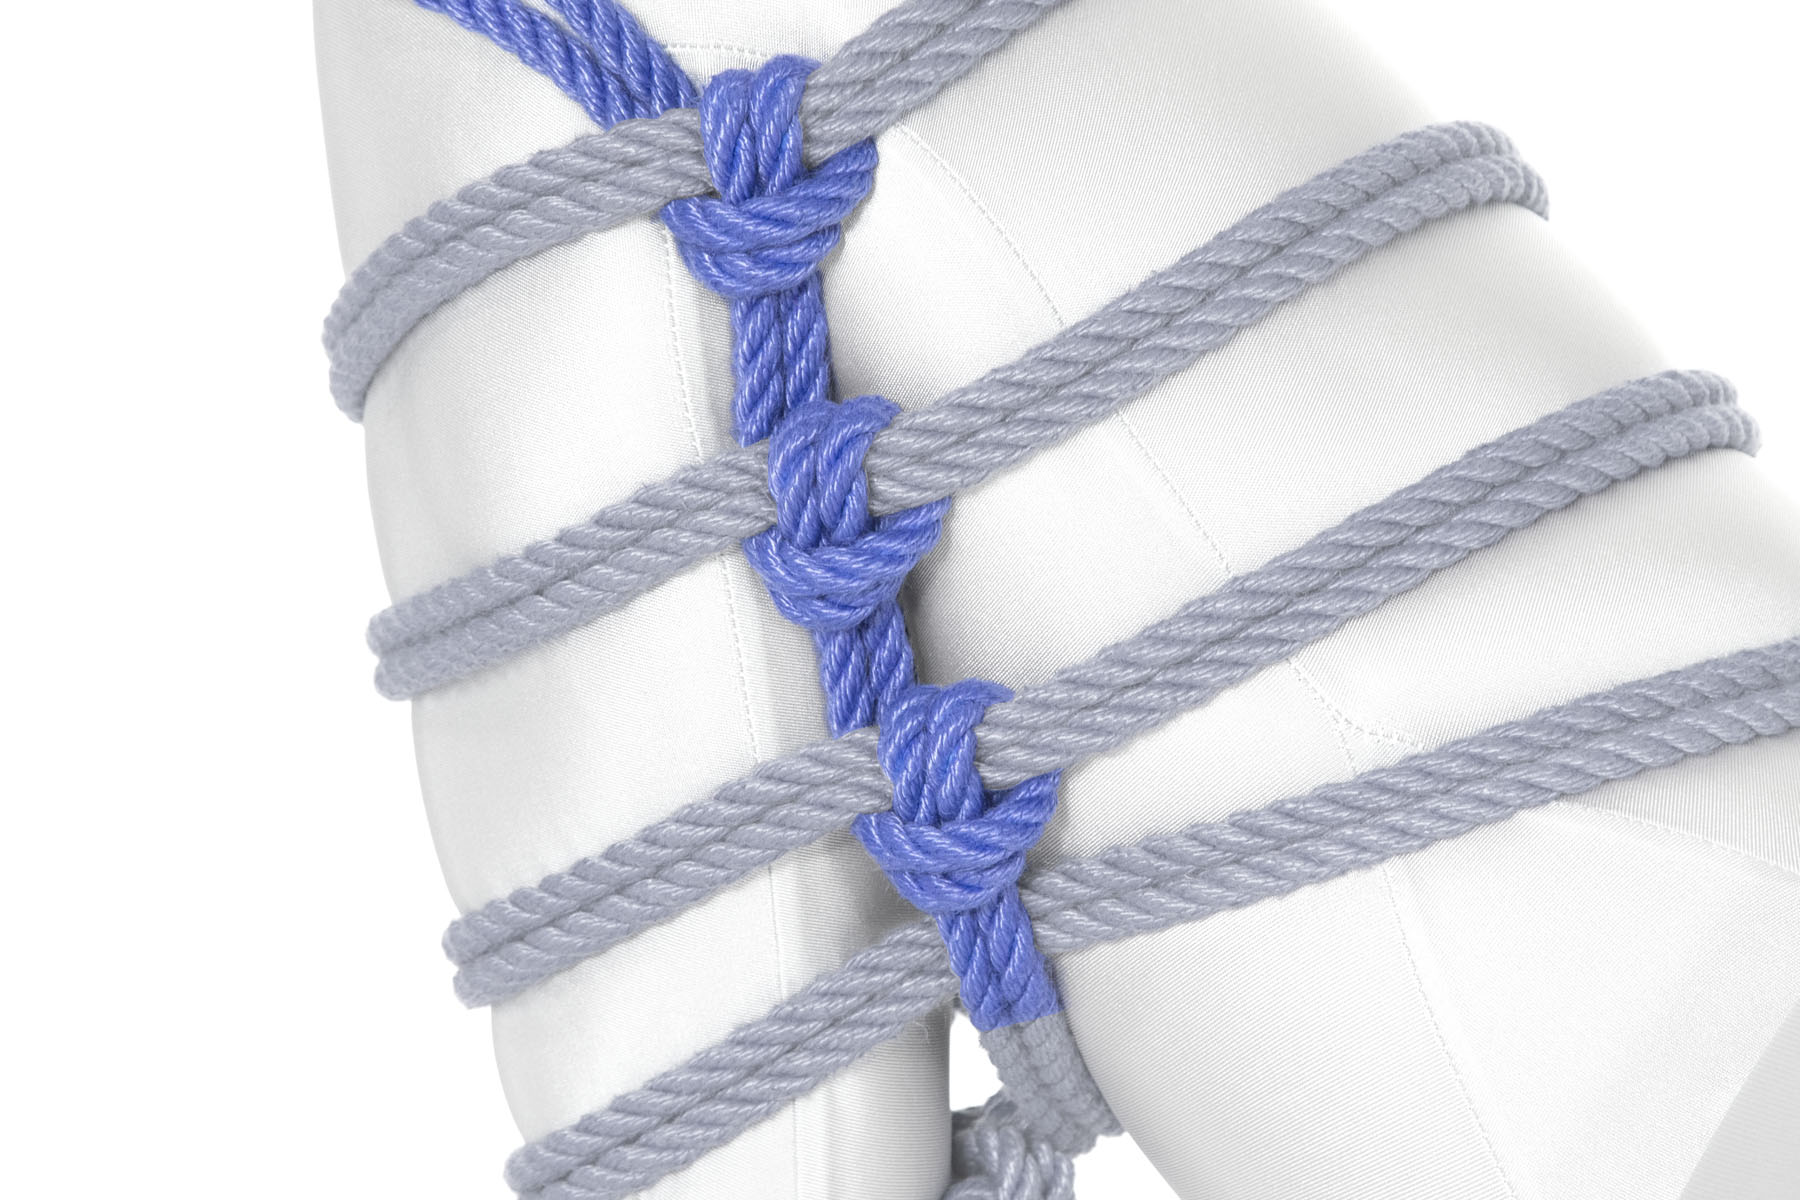 The rope travels up the crease between the thigh and shin, making three Munter frictions as it crosses itself.